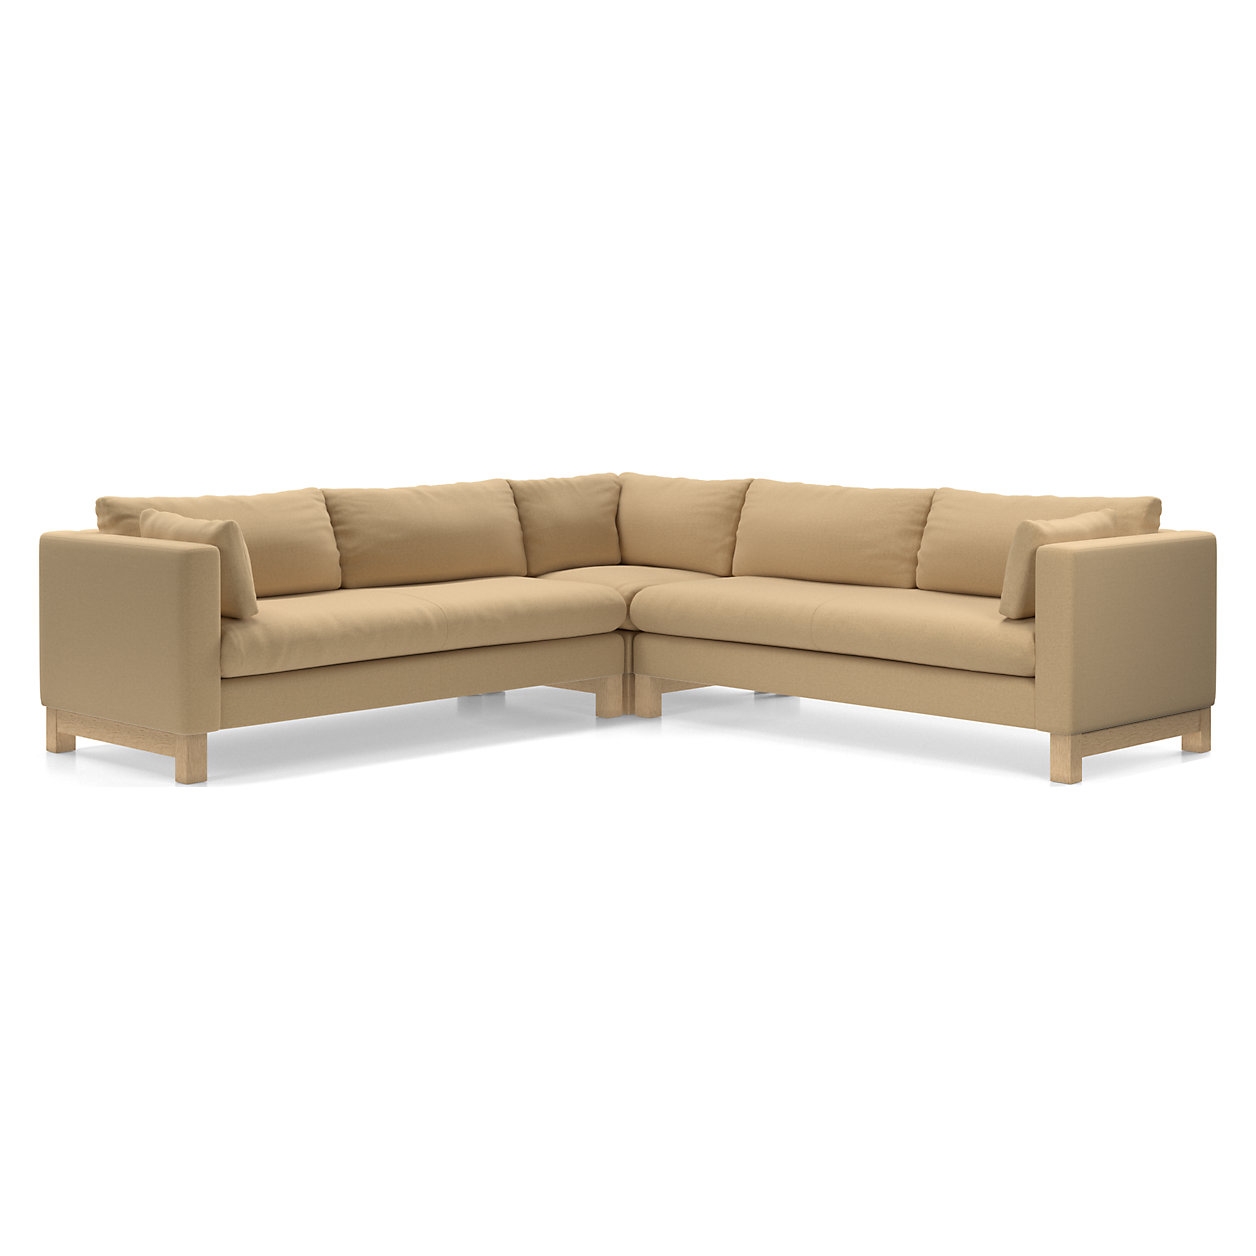 Pacific Bench 3-Piece L-Shaped Sectional Sofa with Wood Legs - Image 1